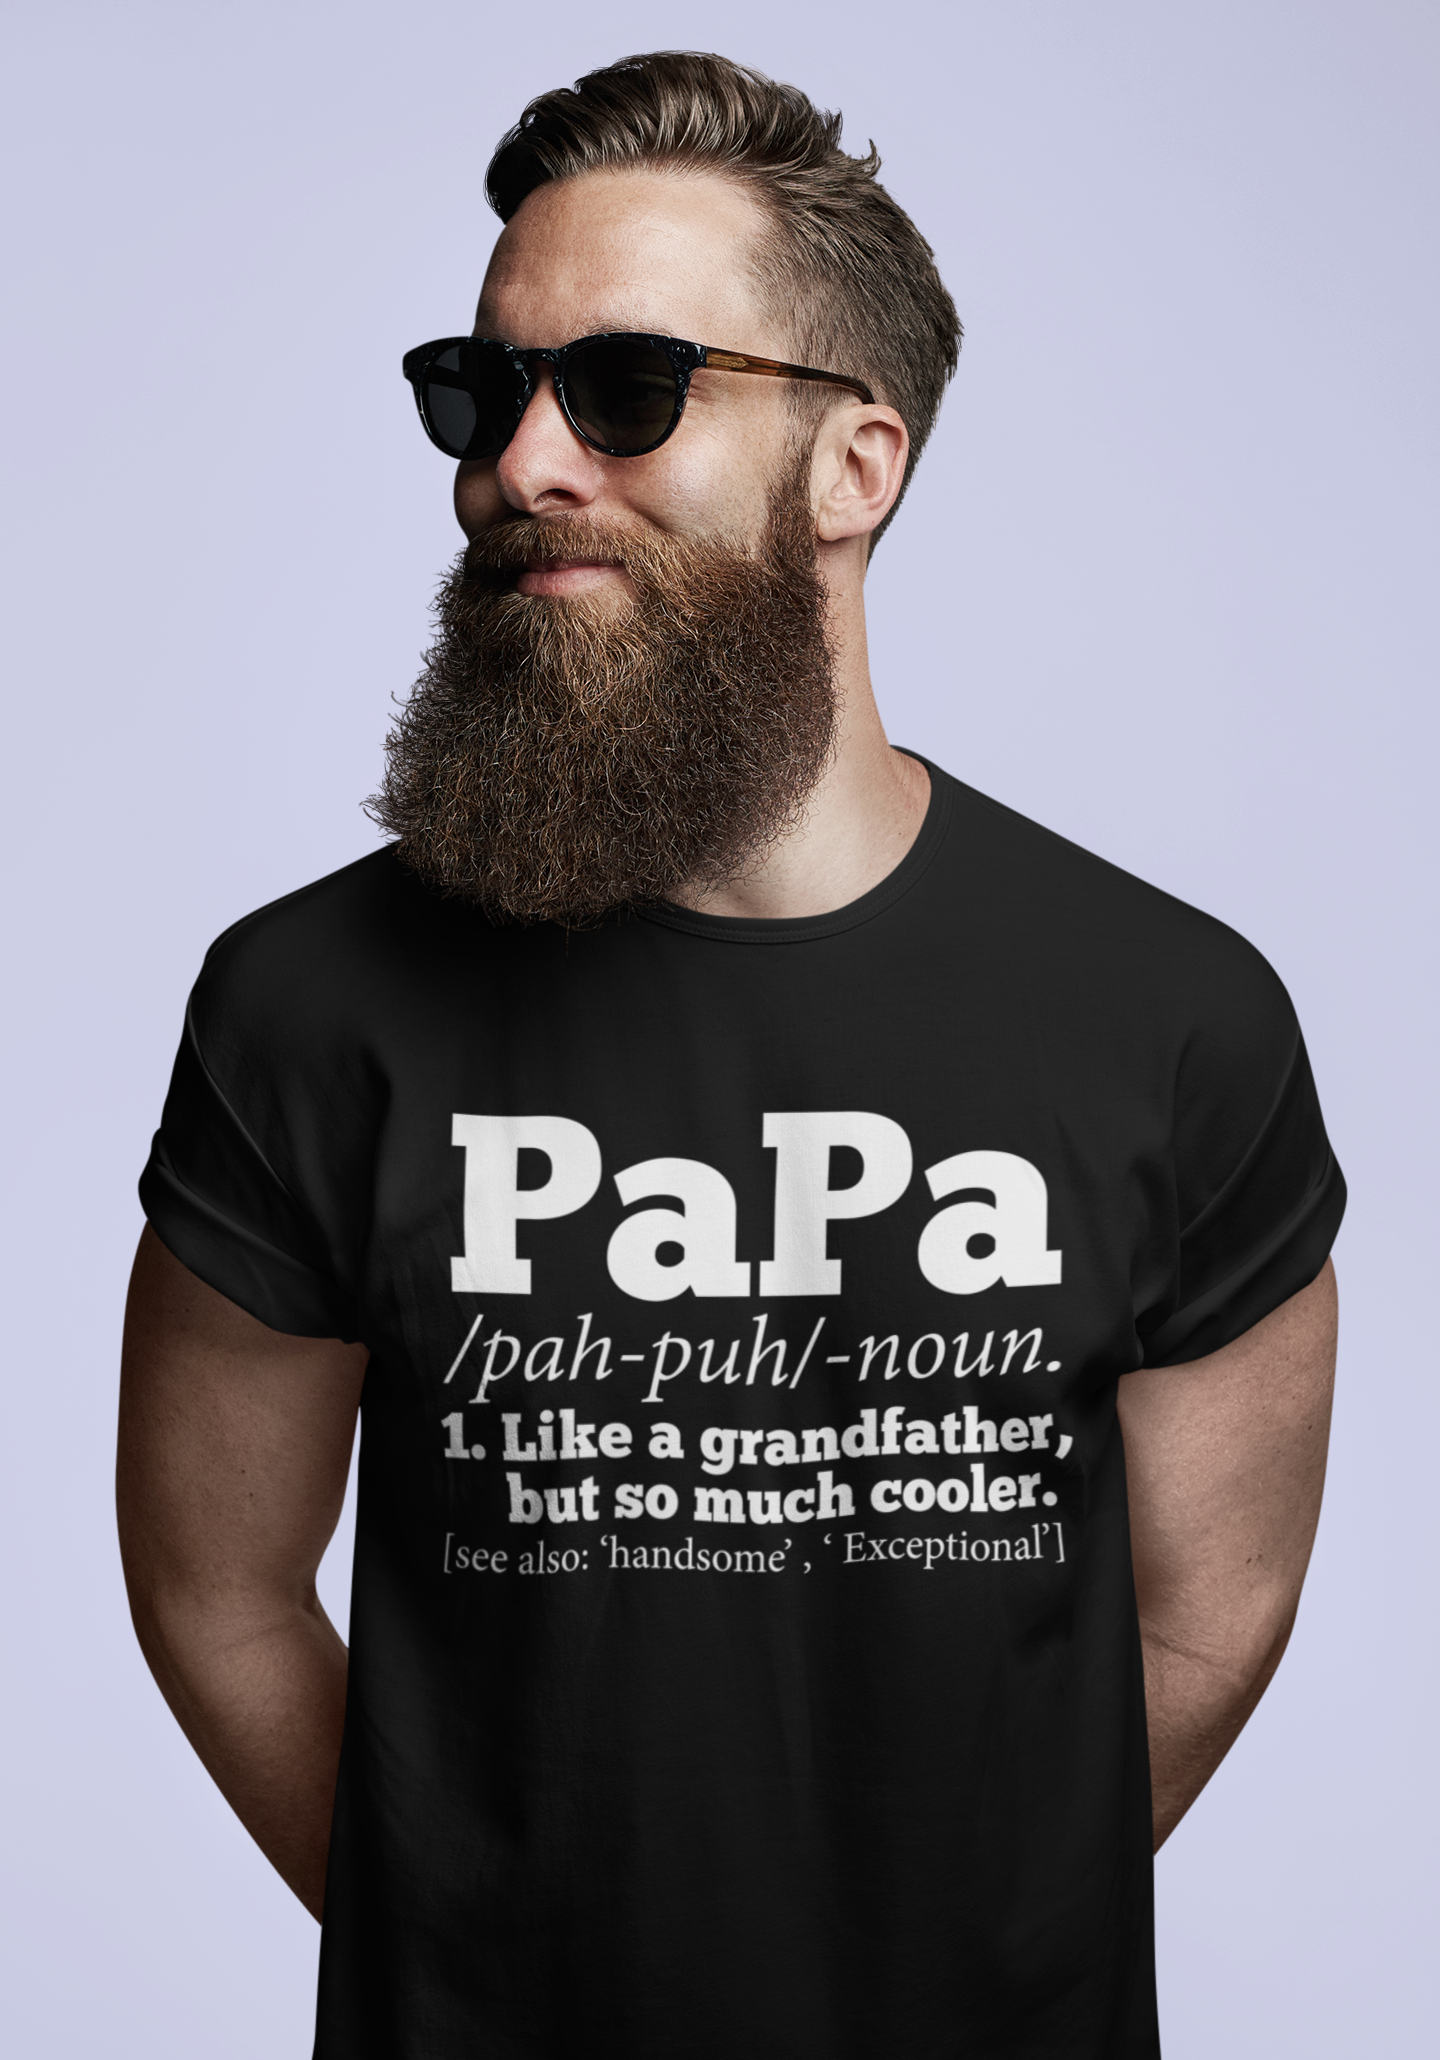 ULTRABASIC Men's Graphic T-Shirt Papa Like A Grandfather But So Much Cooler - Vintage Shirt